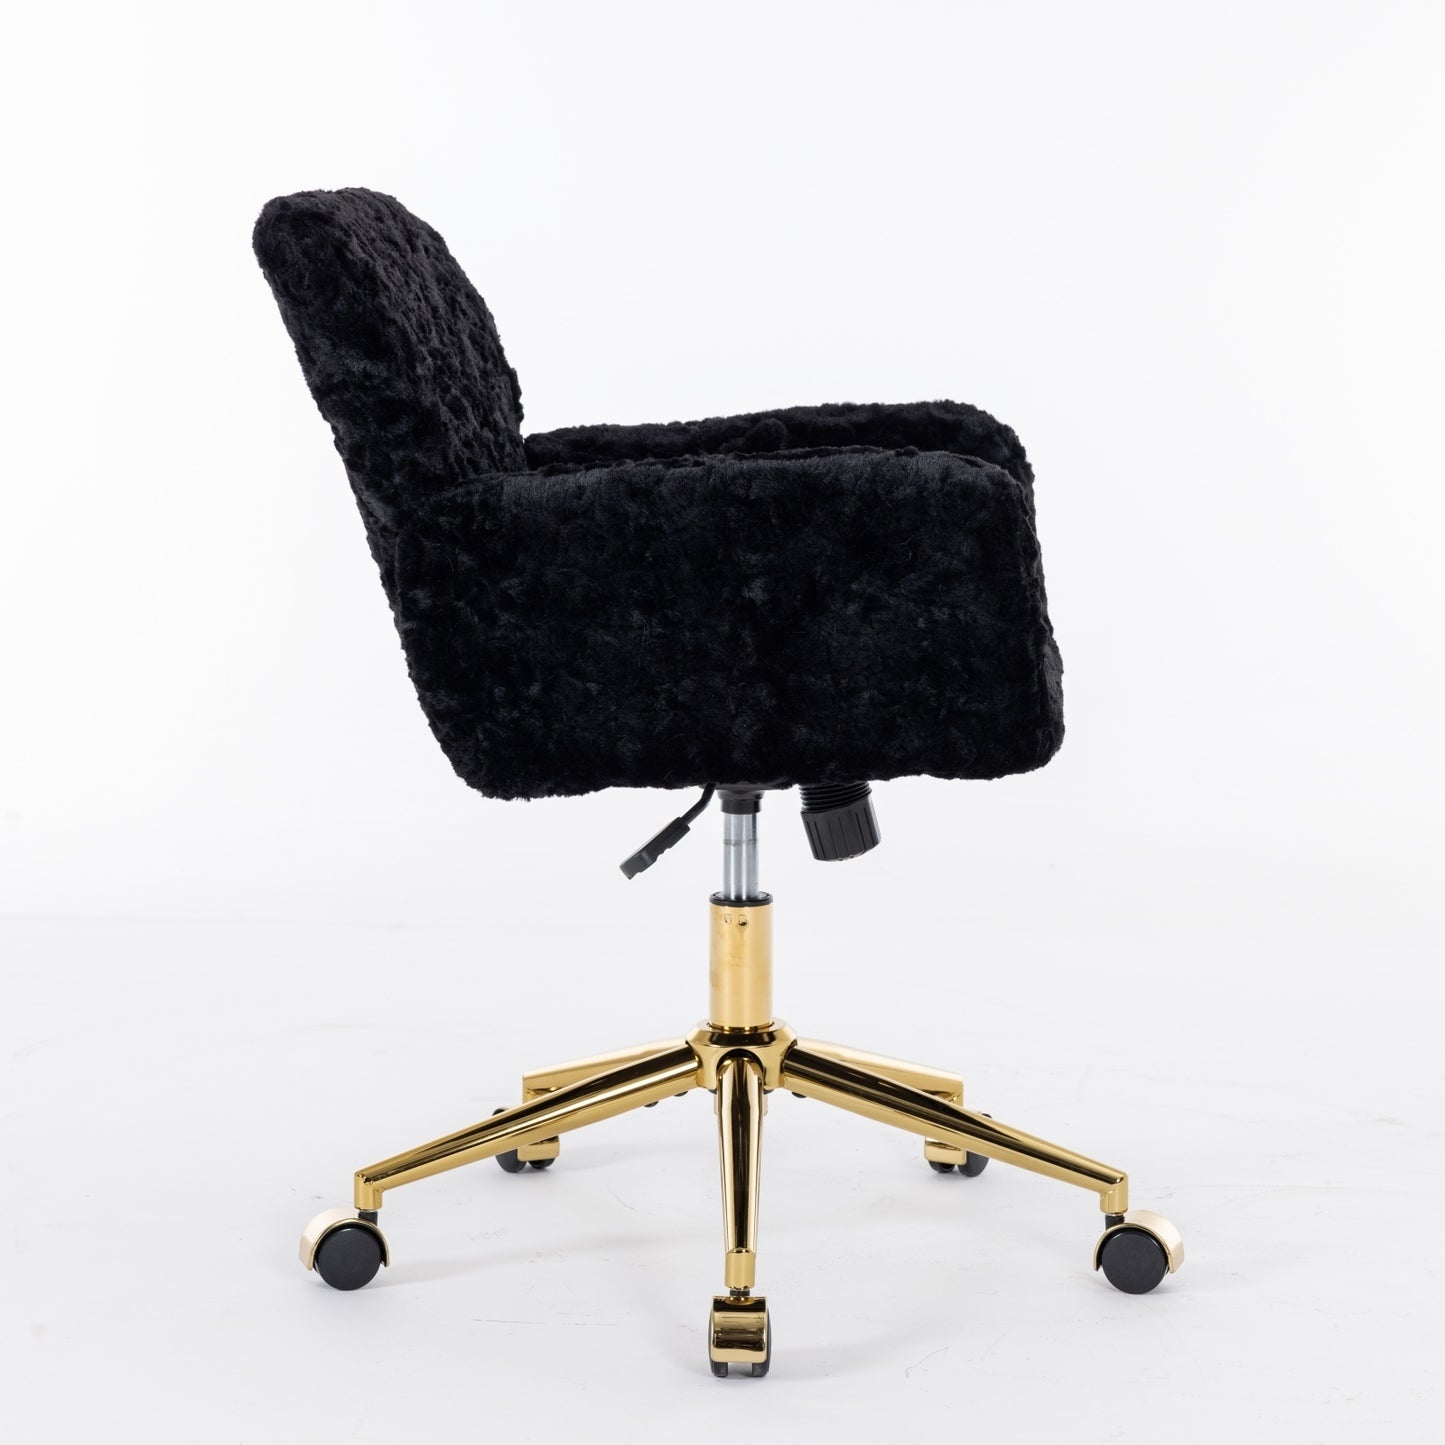 Furniture Office Chair,Artificial rabbit hair Home Office Chair with Golden Metal Base,Adjustable Desk Chair Swivel Office Chair,Vanity Chair(Black)